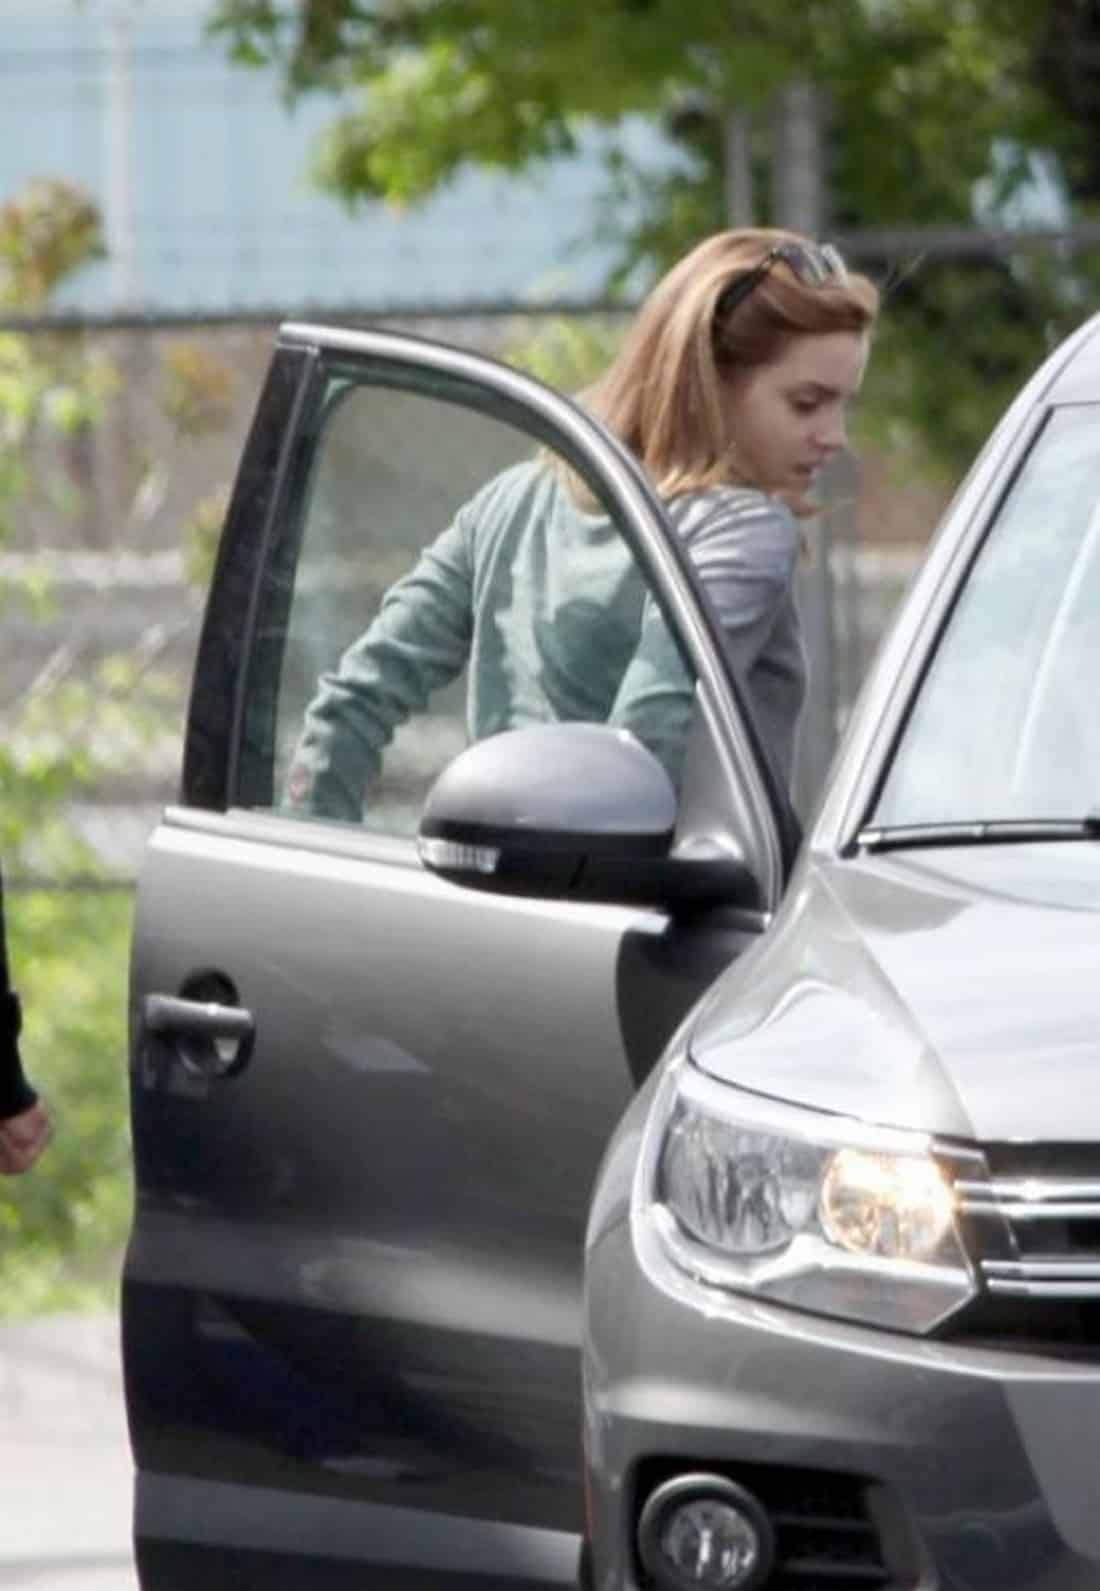 Emma Watson Stuns in a Gray Sweater and Jeans on the Set of "Regression"